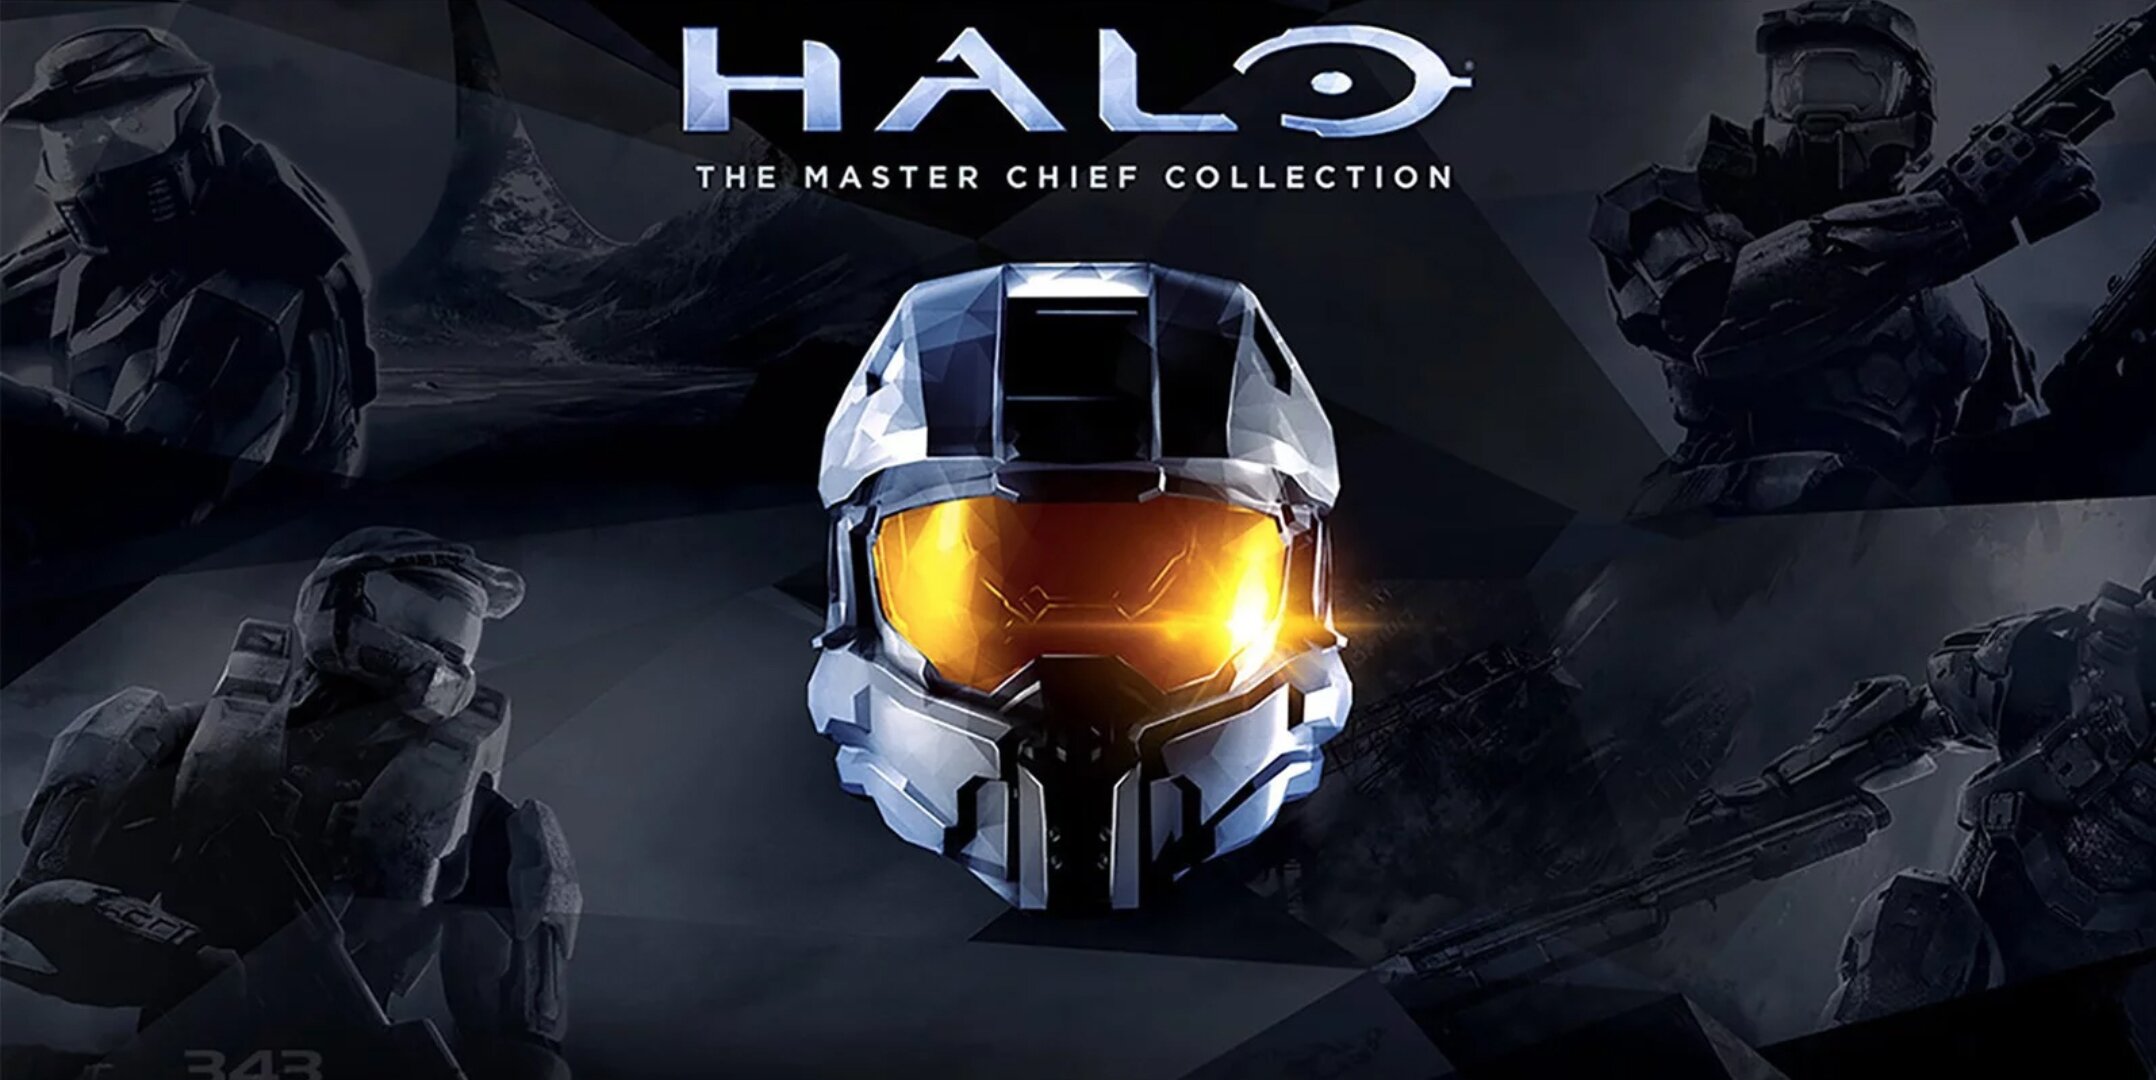 Halo: The Master Chief Collection will be making its way to PC in 2019. Could Halo coming to the PC help reinvent a dormant competitive scene?